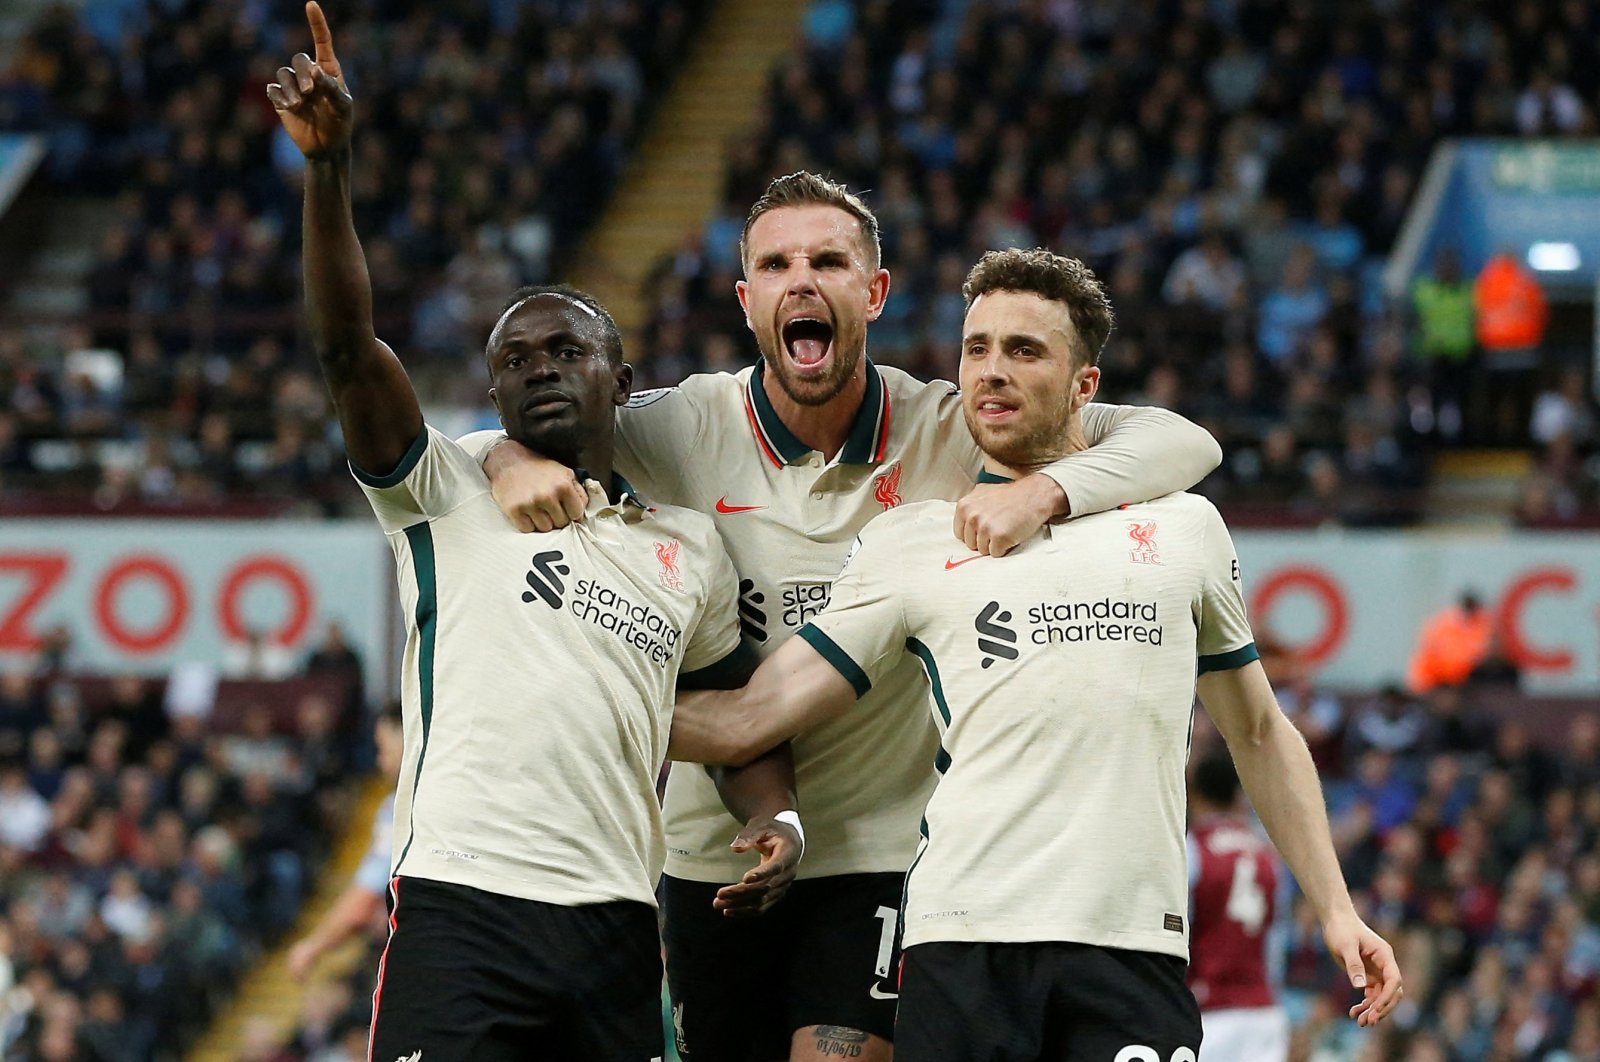 Liverpool&#039;s Sadio Mane (L) celebrates with teammates after scoring a goal in a Premier League match against Aston Villa, Birmingham, England, May 10, 2022. (Reuters Photo)